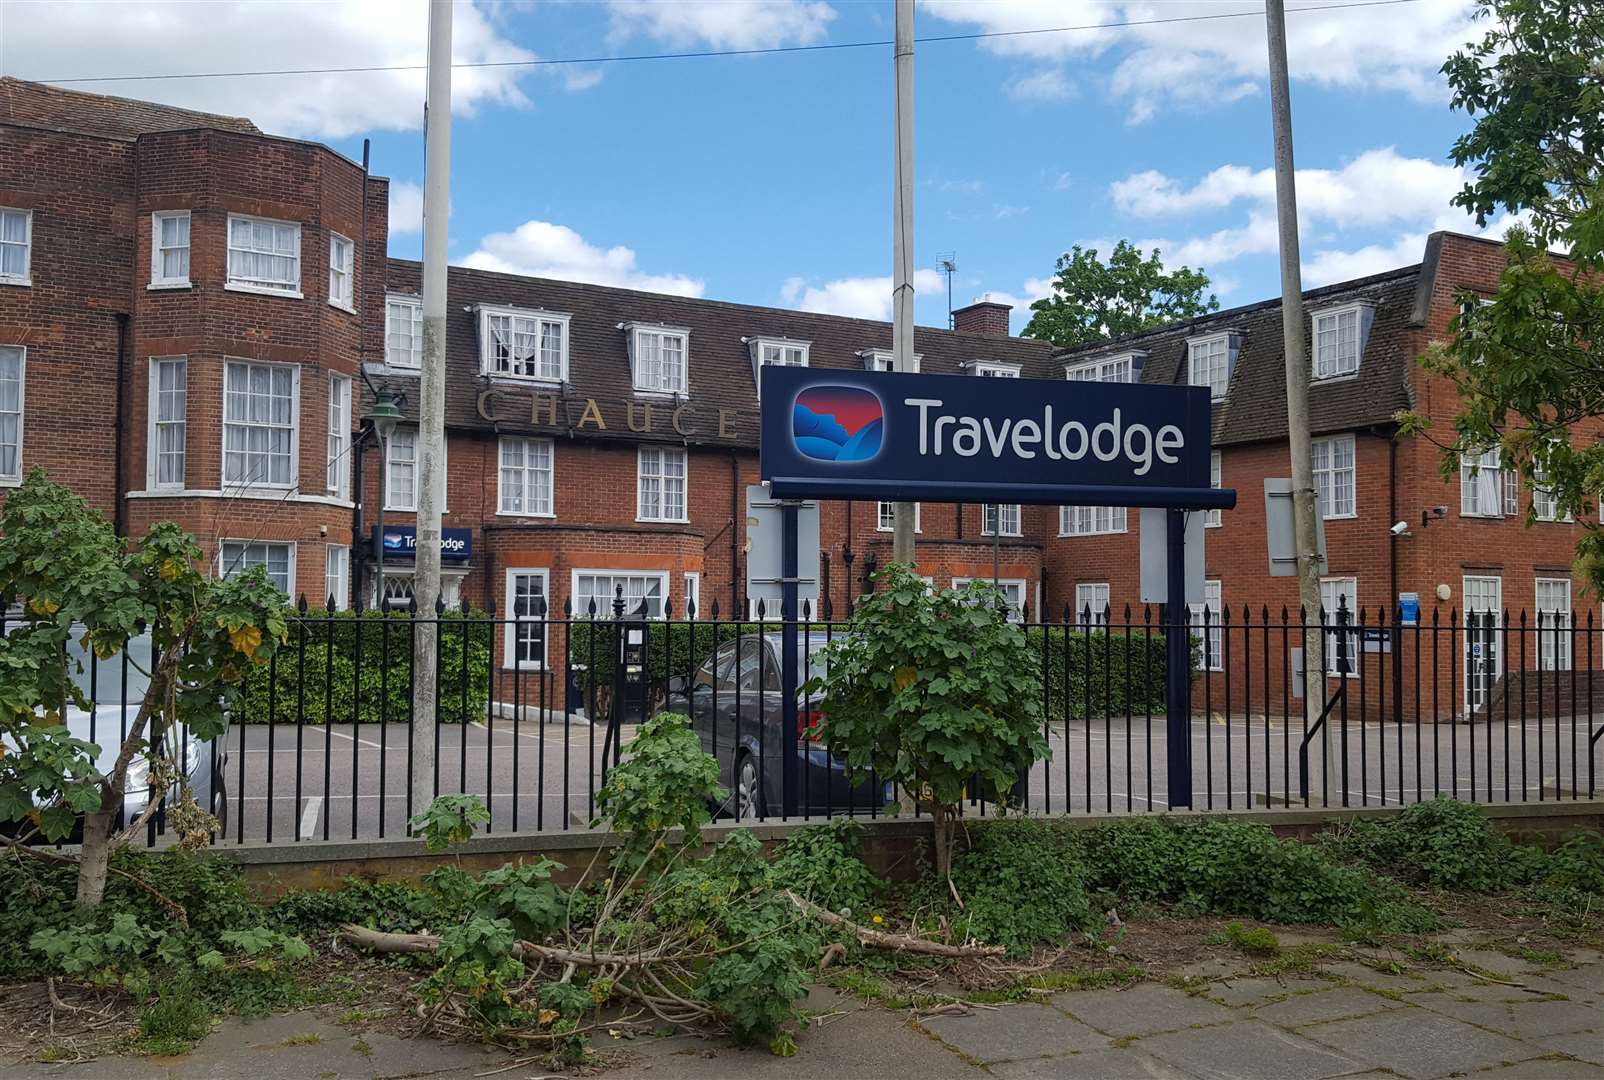 The Travelodge in Ivy Lane, Canterbury – where Mary Tourtel spent her final days